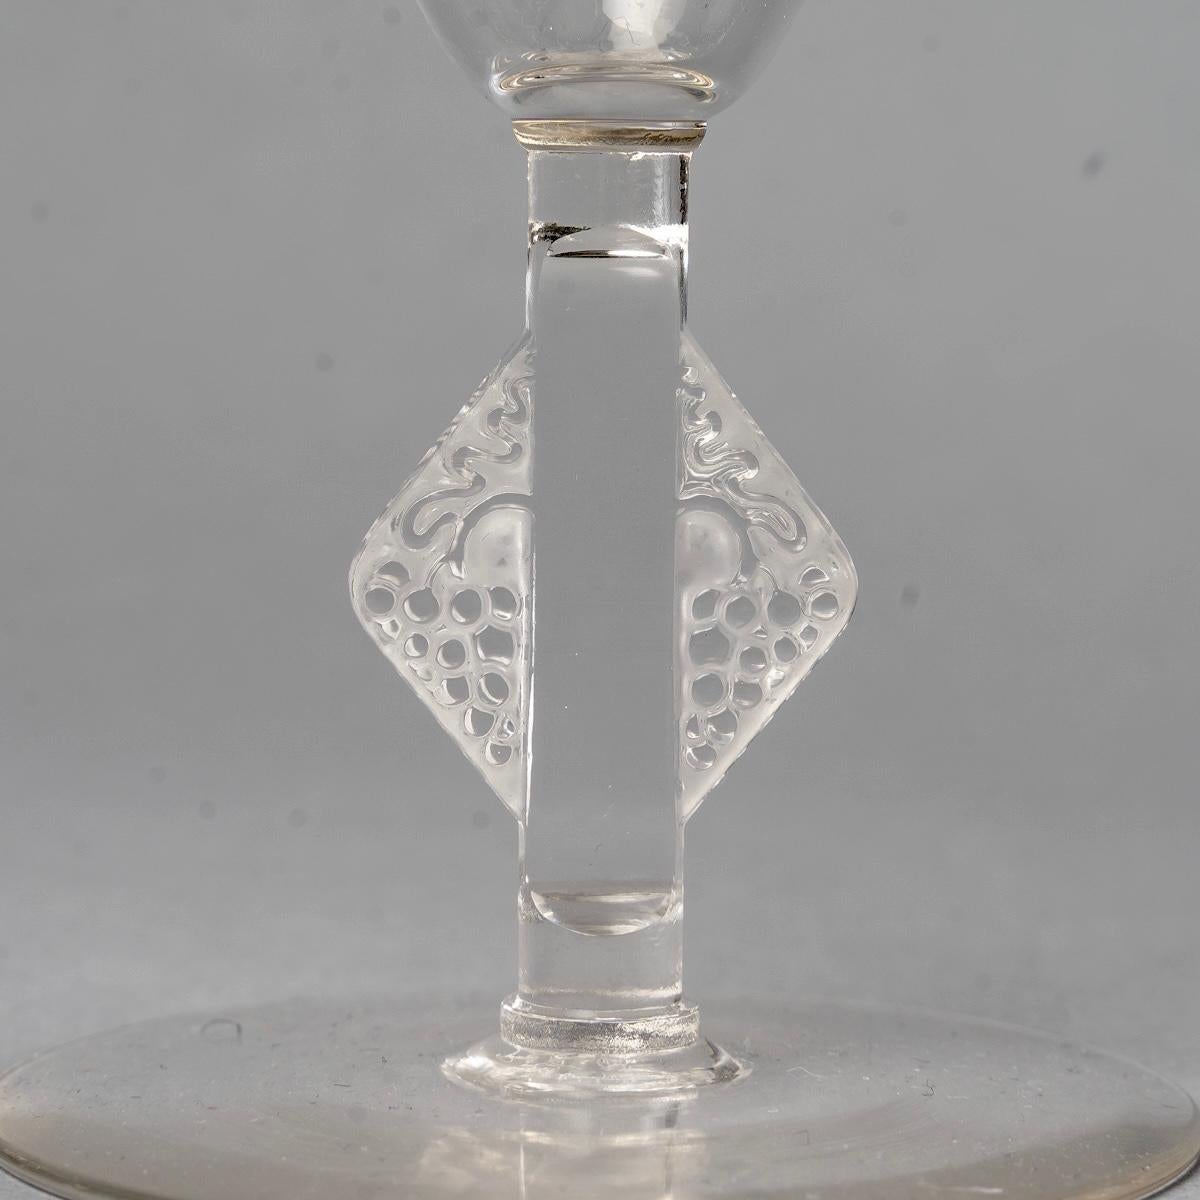 French 1924 René Lalique, Set of Tablewares Glasses Savergne Clear Glass, 34 Pieces For Sale